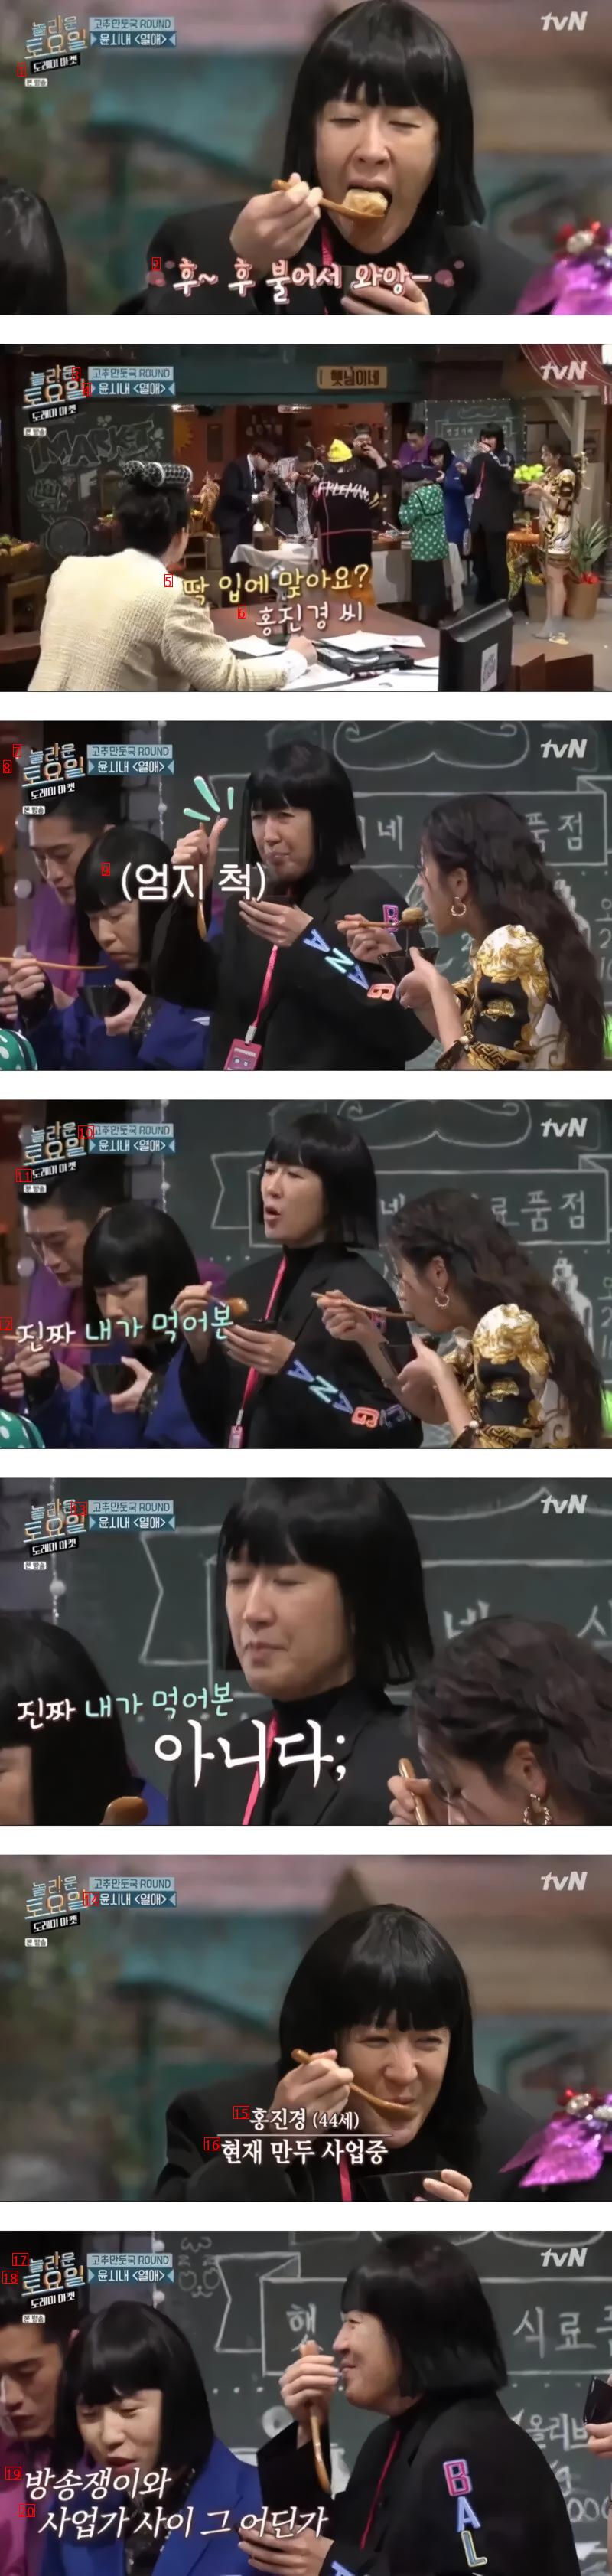 Hong Jinkyung almost made a mistake during the show.jpg